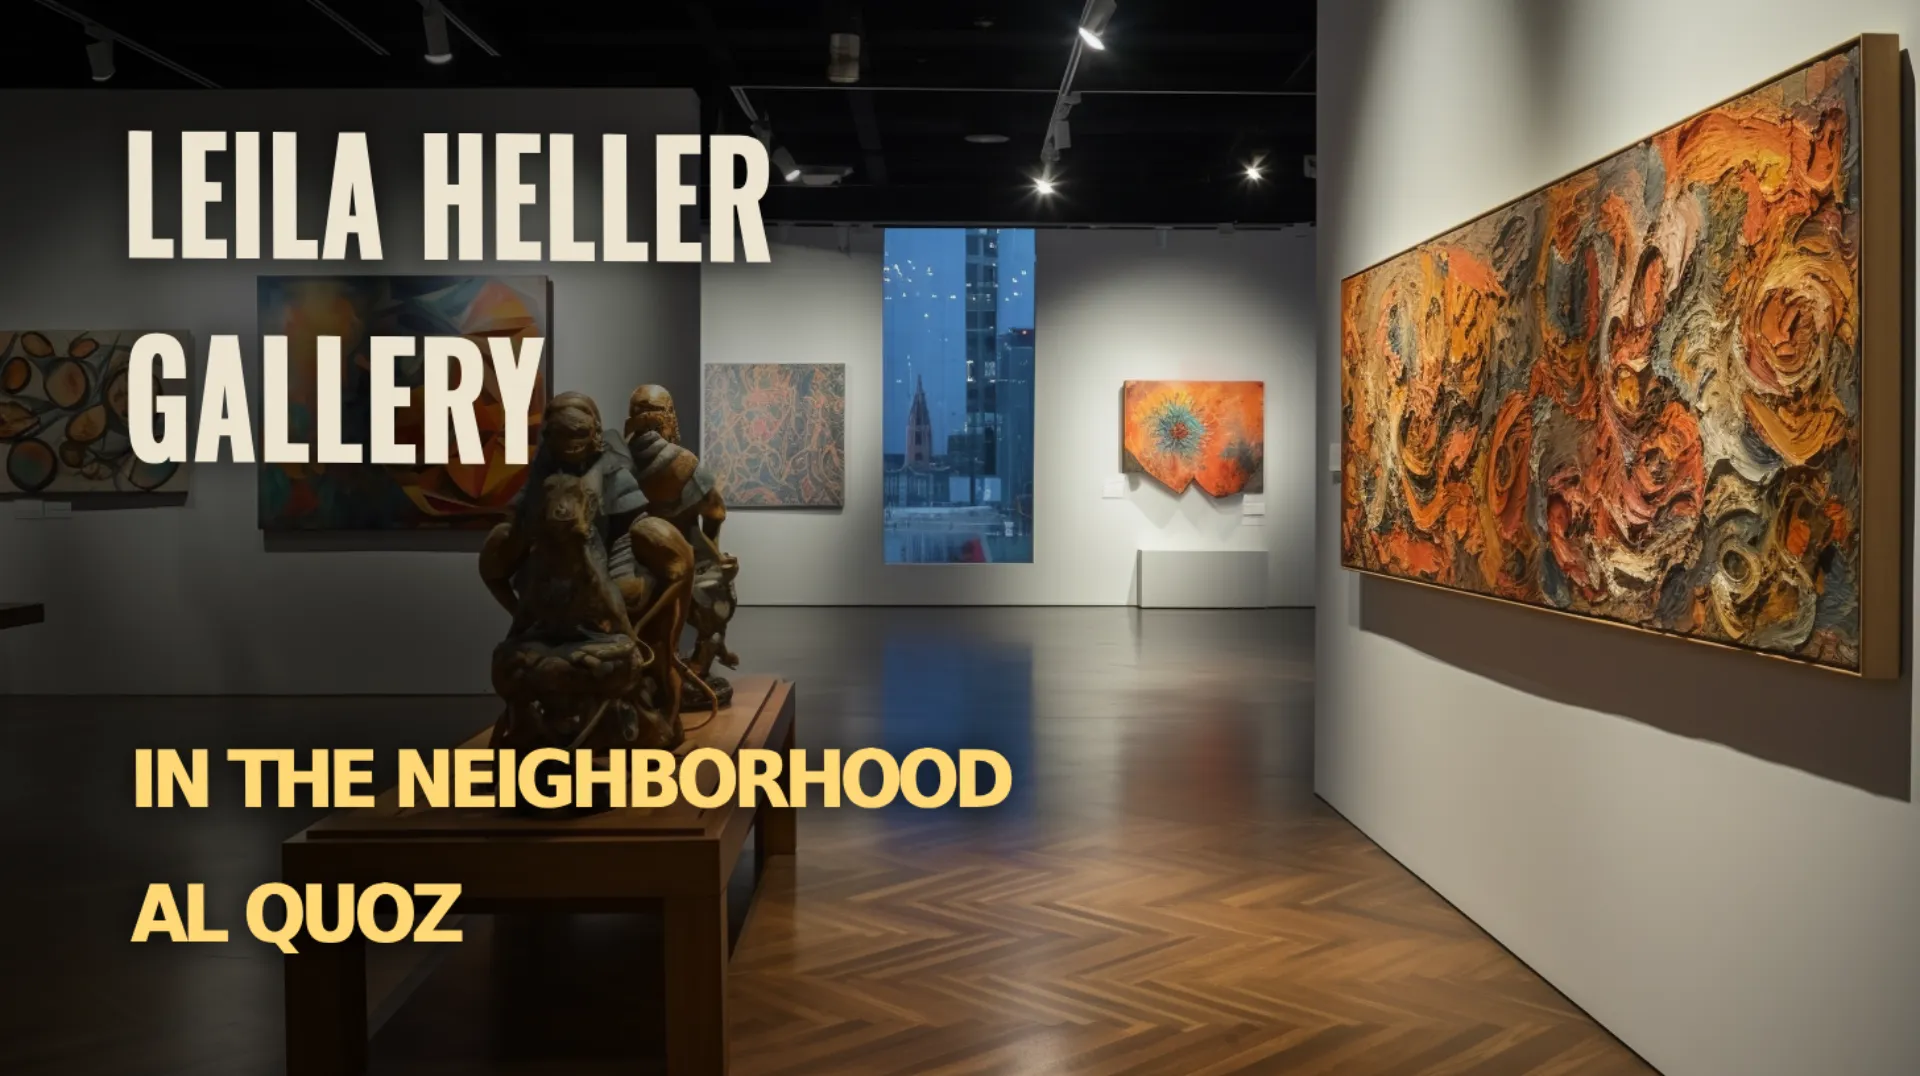 Leila Heller Gallery - A captivating view of the exquisite artworks and contemporary masterpieces exhibited at Leila Heller Gallery